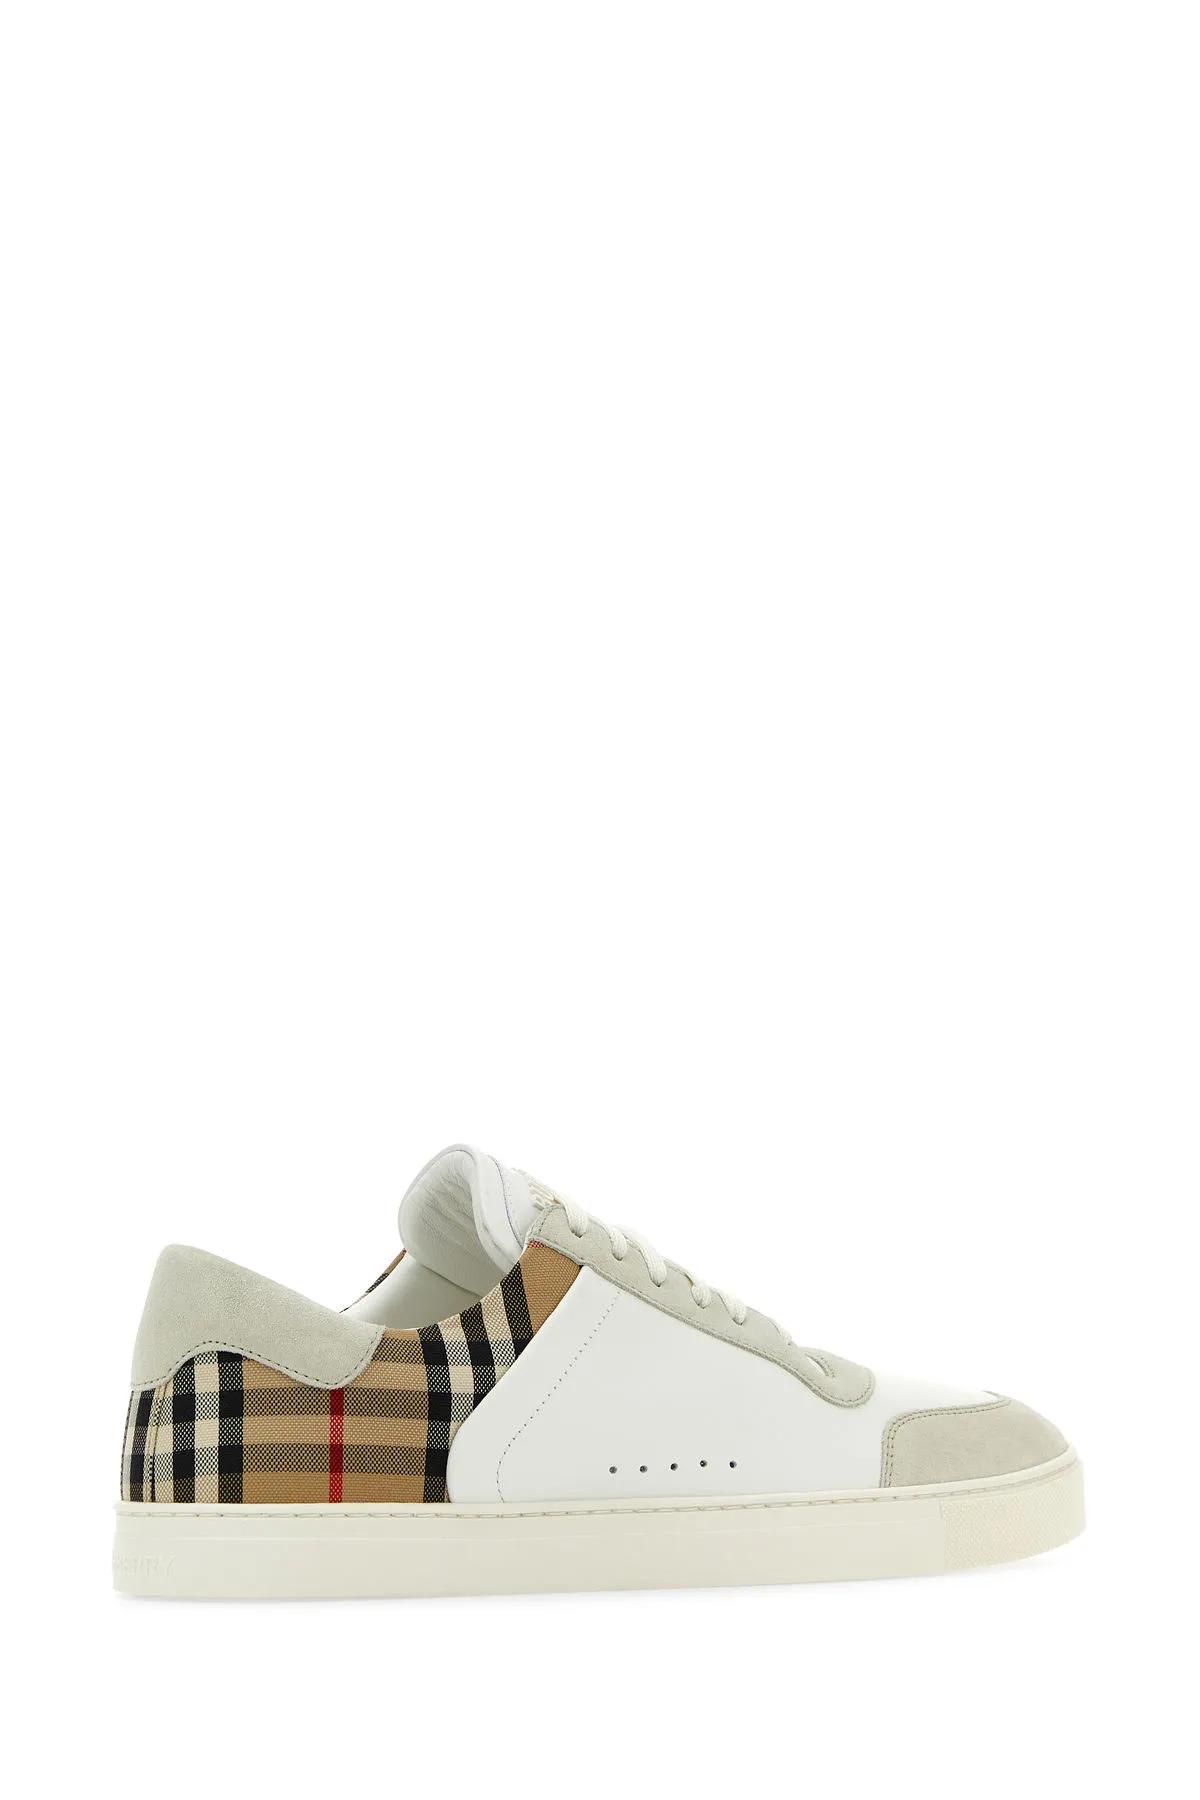 Shop Burberry Multicolor Suede And Leather Sneakers In White